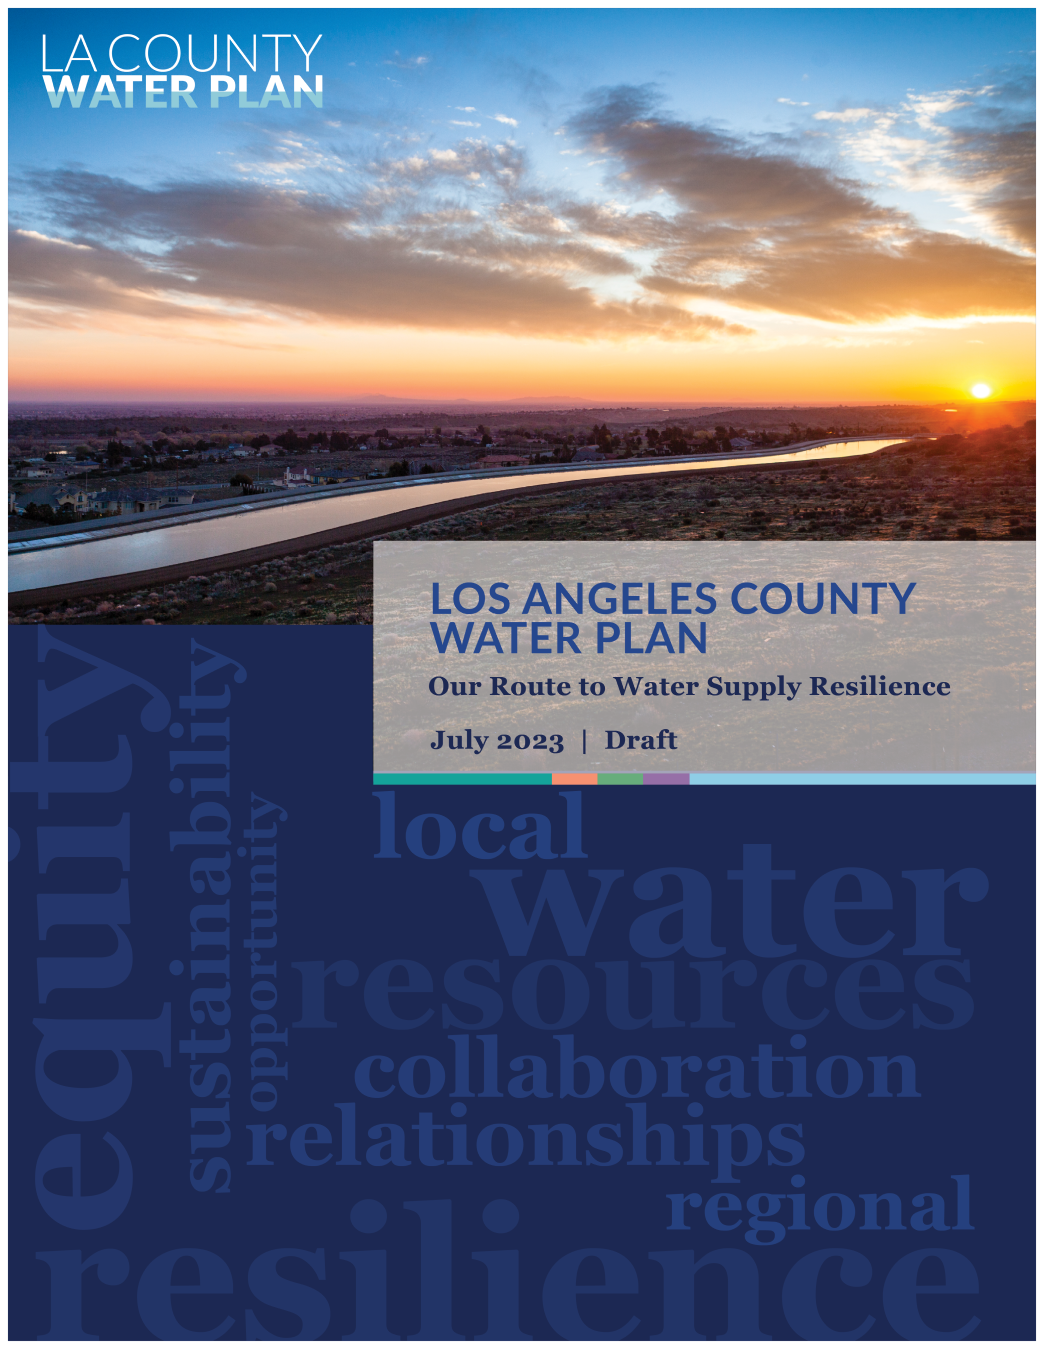 Thumbnail of the LA County Water Plan.  The top half of the cover has a picture of a sunset a canal and the LA County Water Plan logo in the top left corner. The bottom half of the cover has words that describe the LA County Water Plan.   